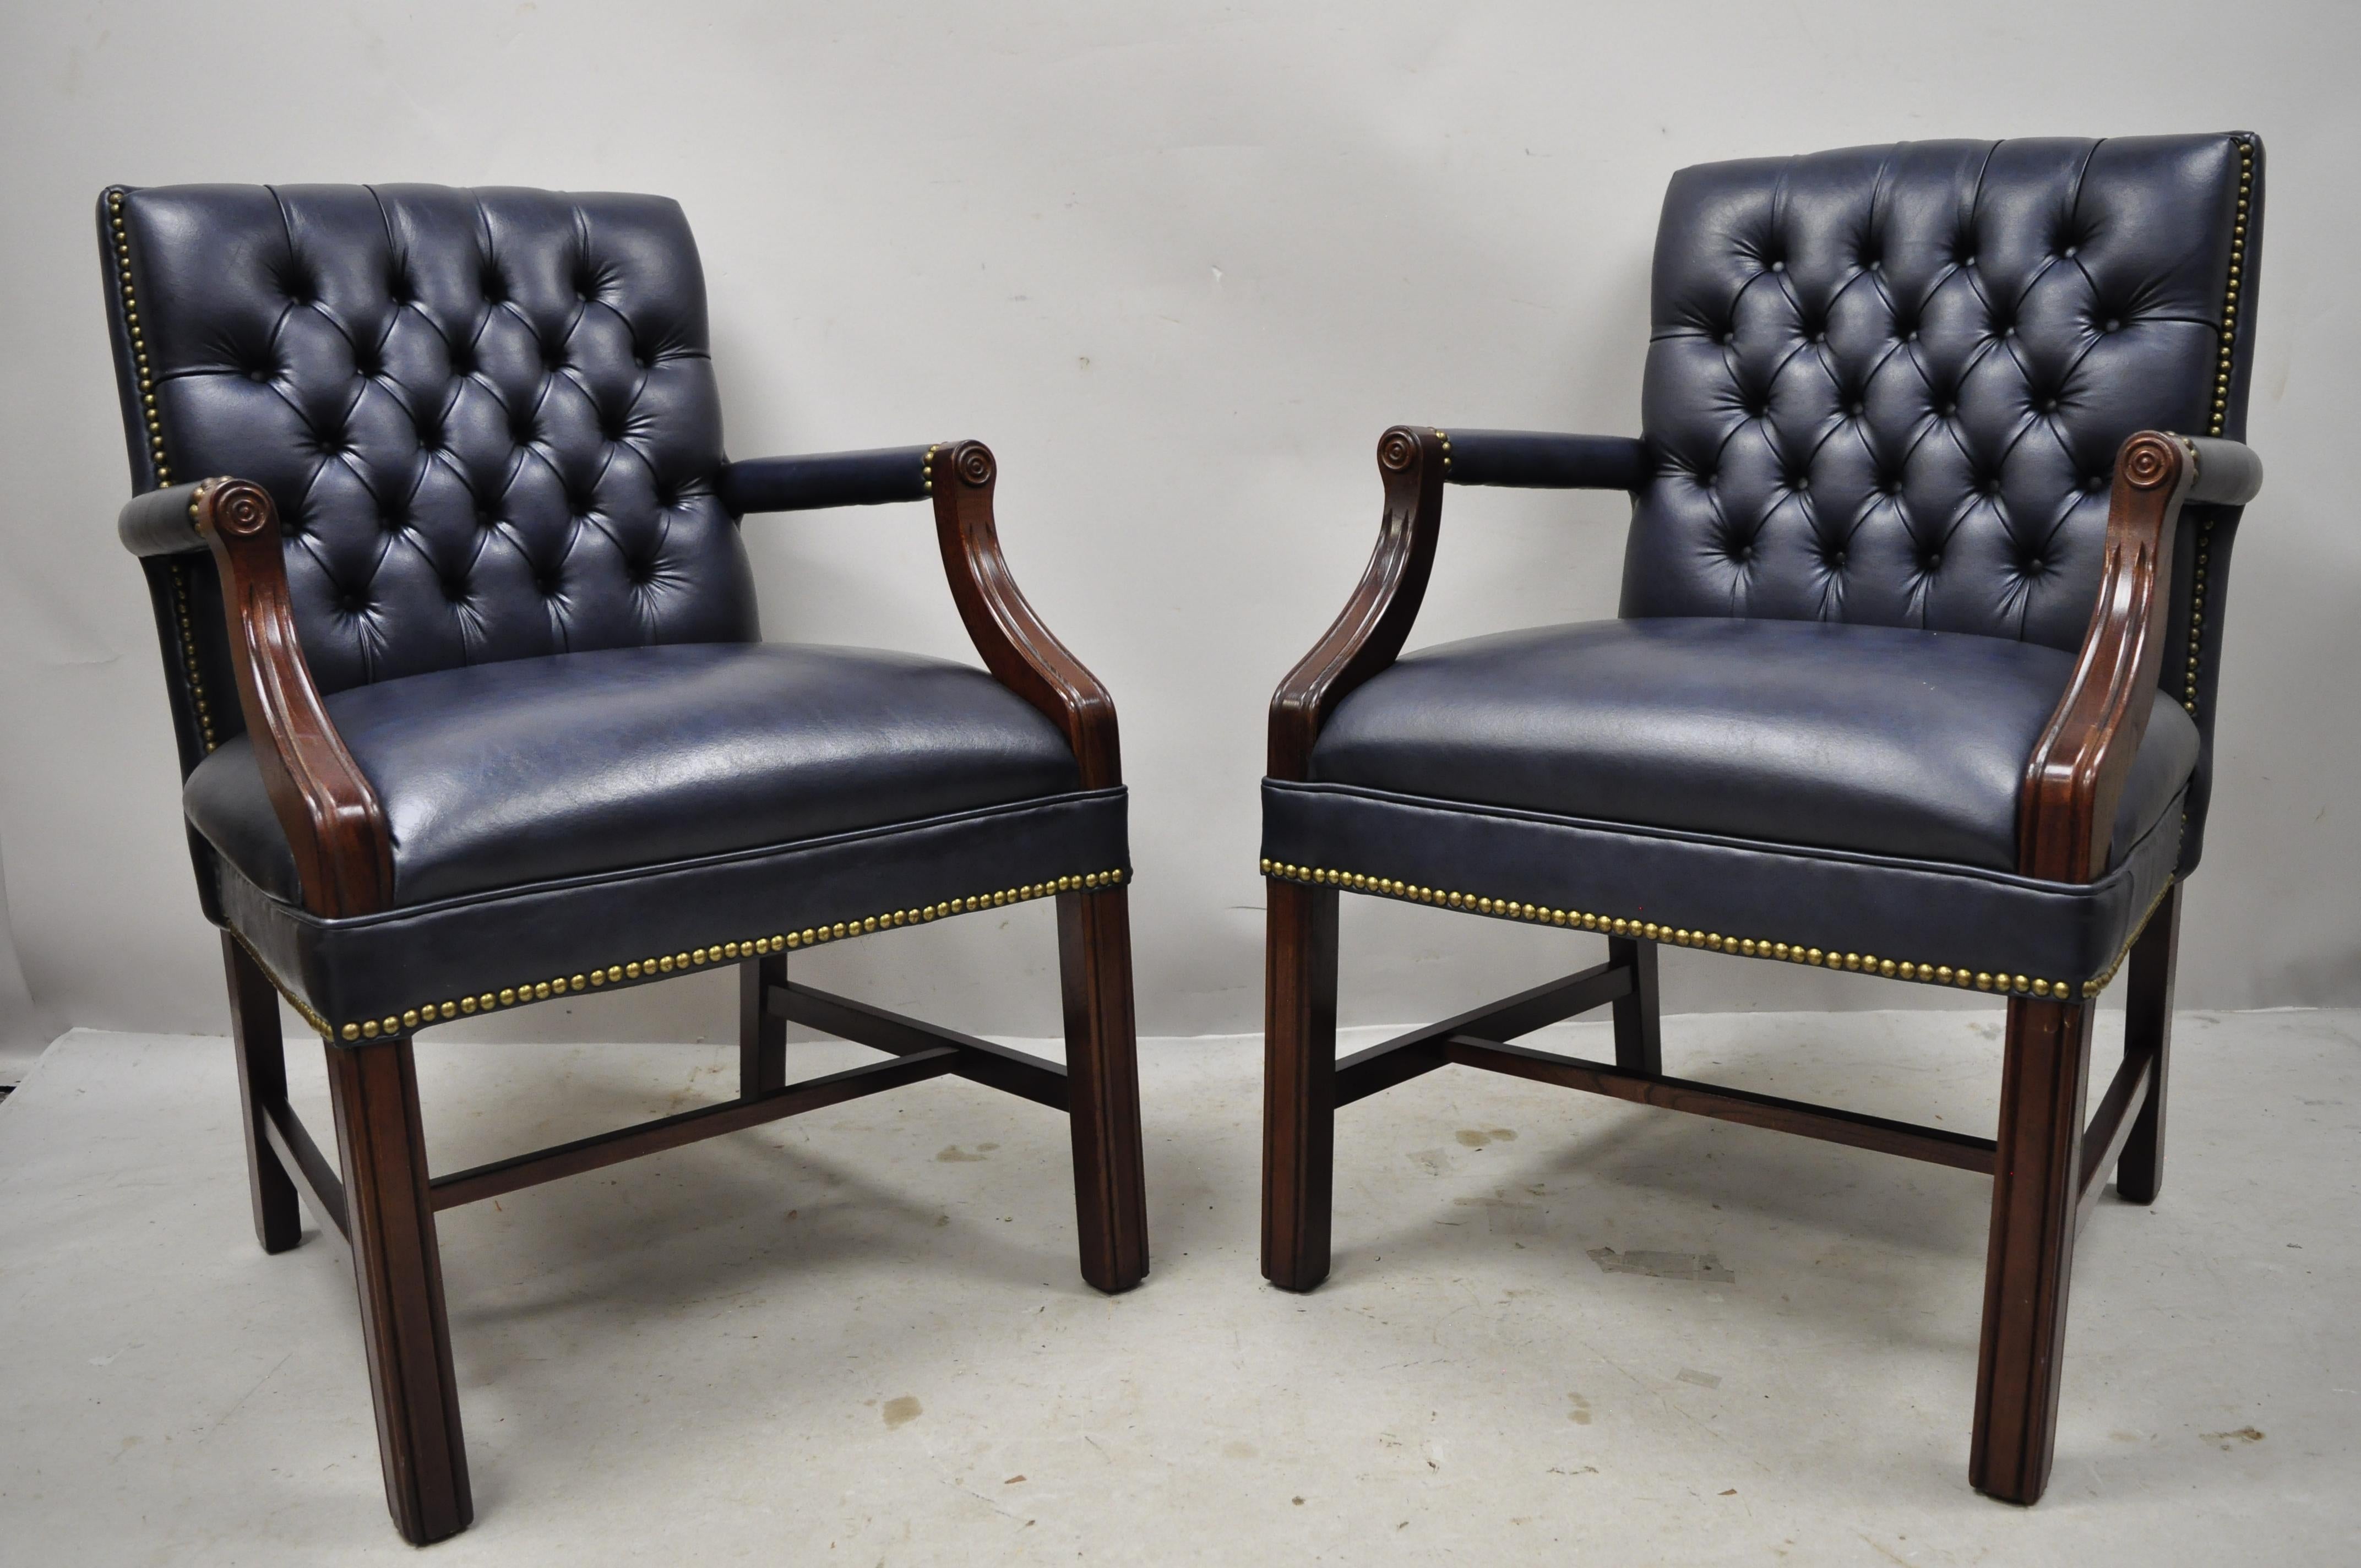 Vintage English Chippendale Paoli Inc blue tufted faux leather vinyl office armchairs - a pair. Item features blue tufted vinyl/naugahyde fabric, nailhead trim, solid wood frame, upholstered armrests, original label, very nice vintage pair, great